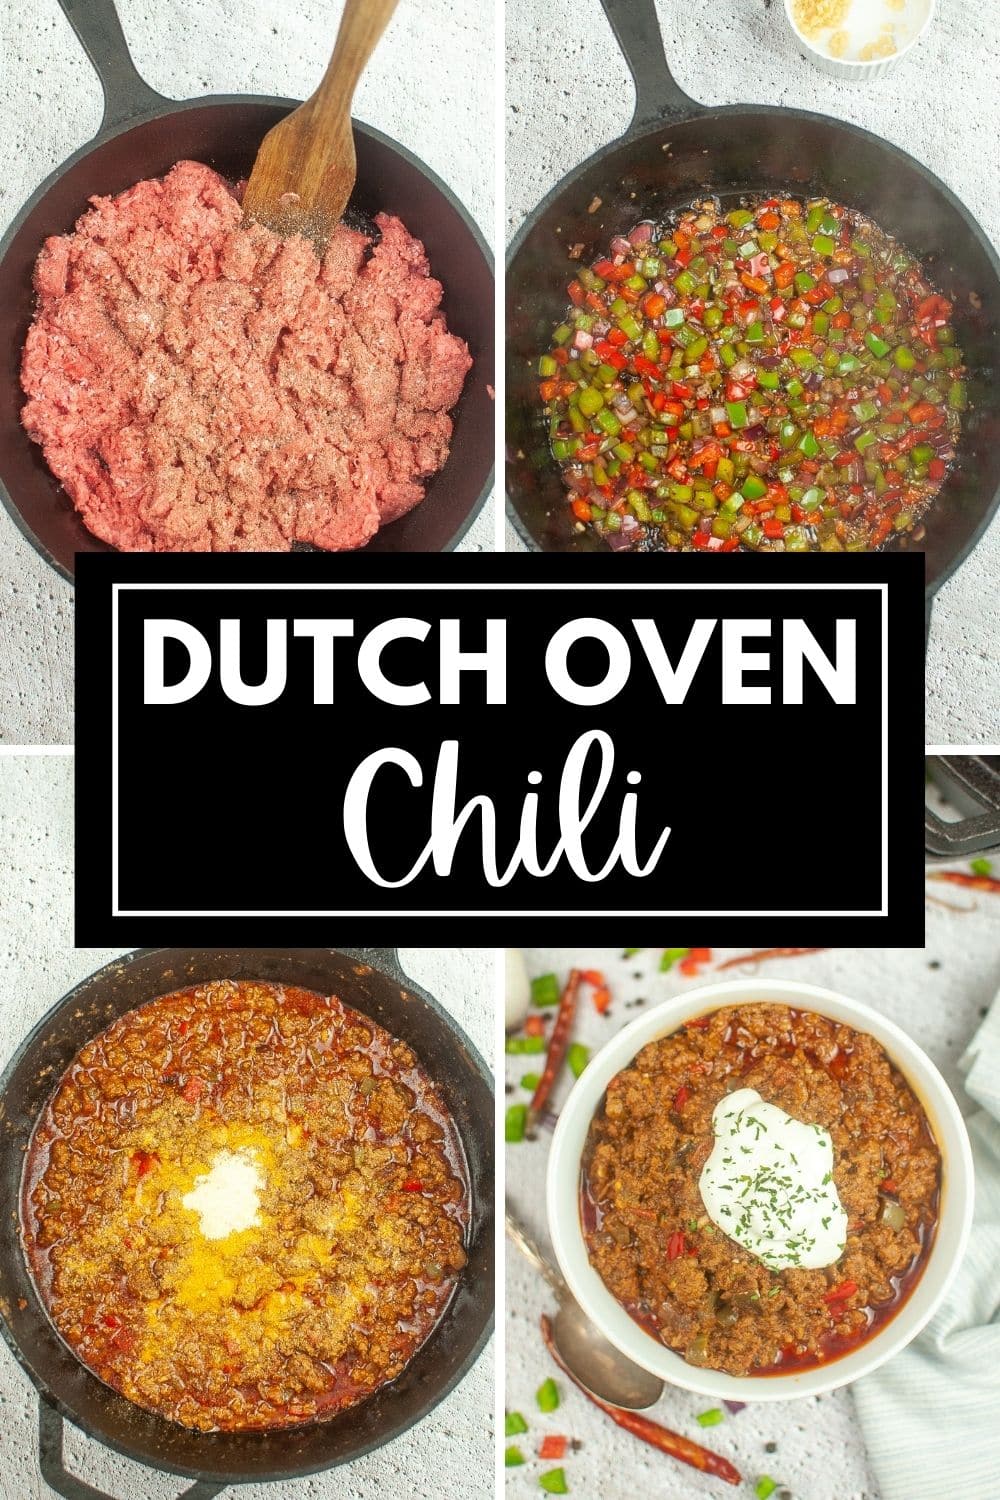 Dutch oven chili cooked in a skillet.